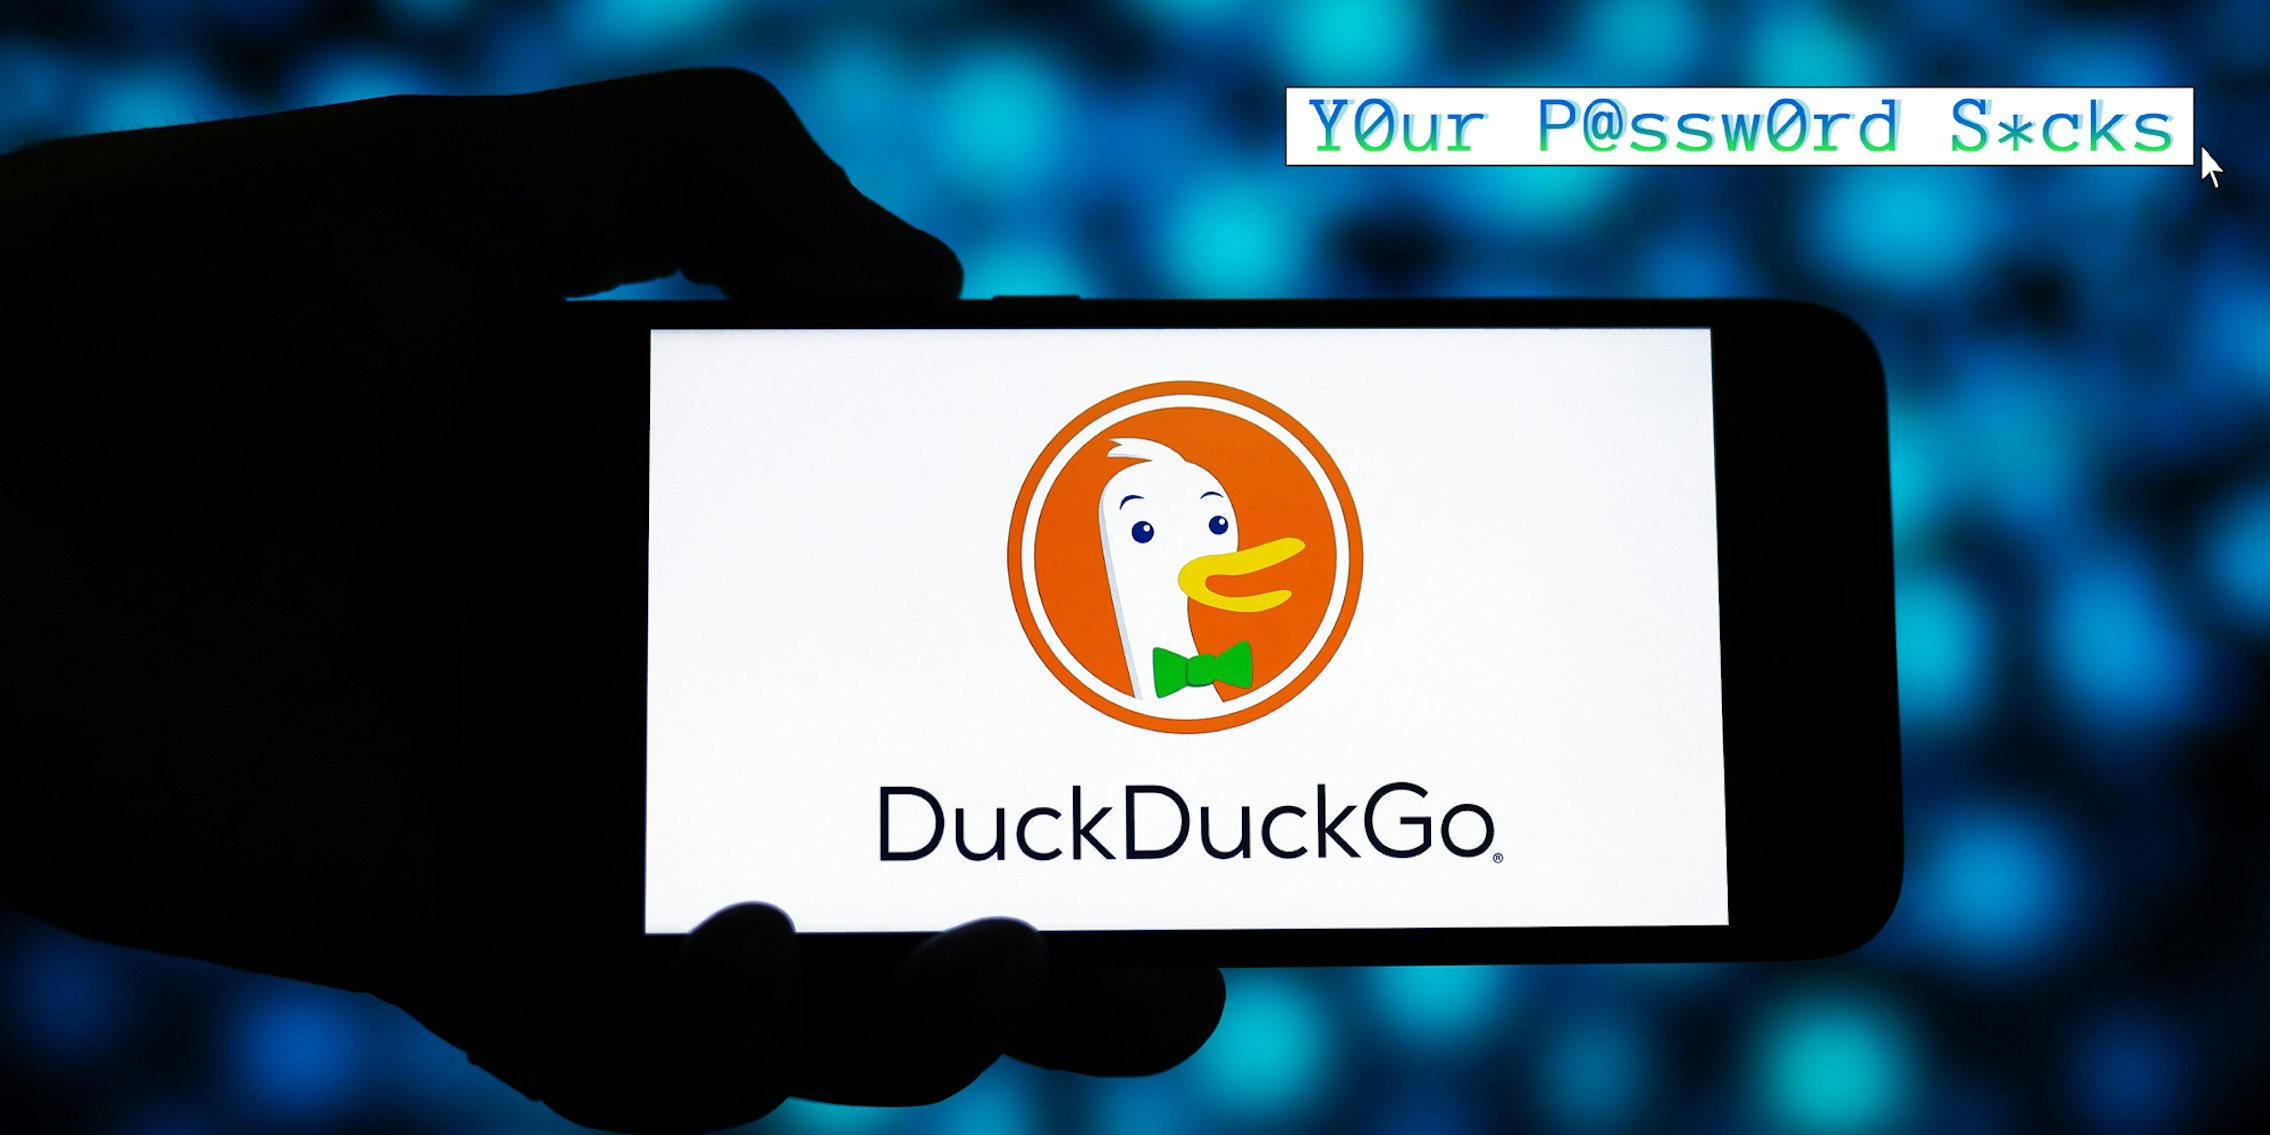 A Phone with DuckDuckGo on it. The Daily Dot newsletter web_crawlr column logo for 'Your Password Sucks' is in the top right corner.